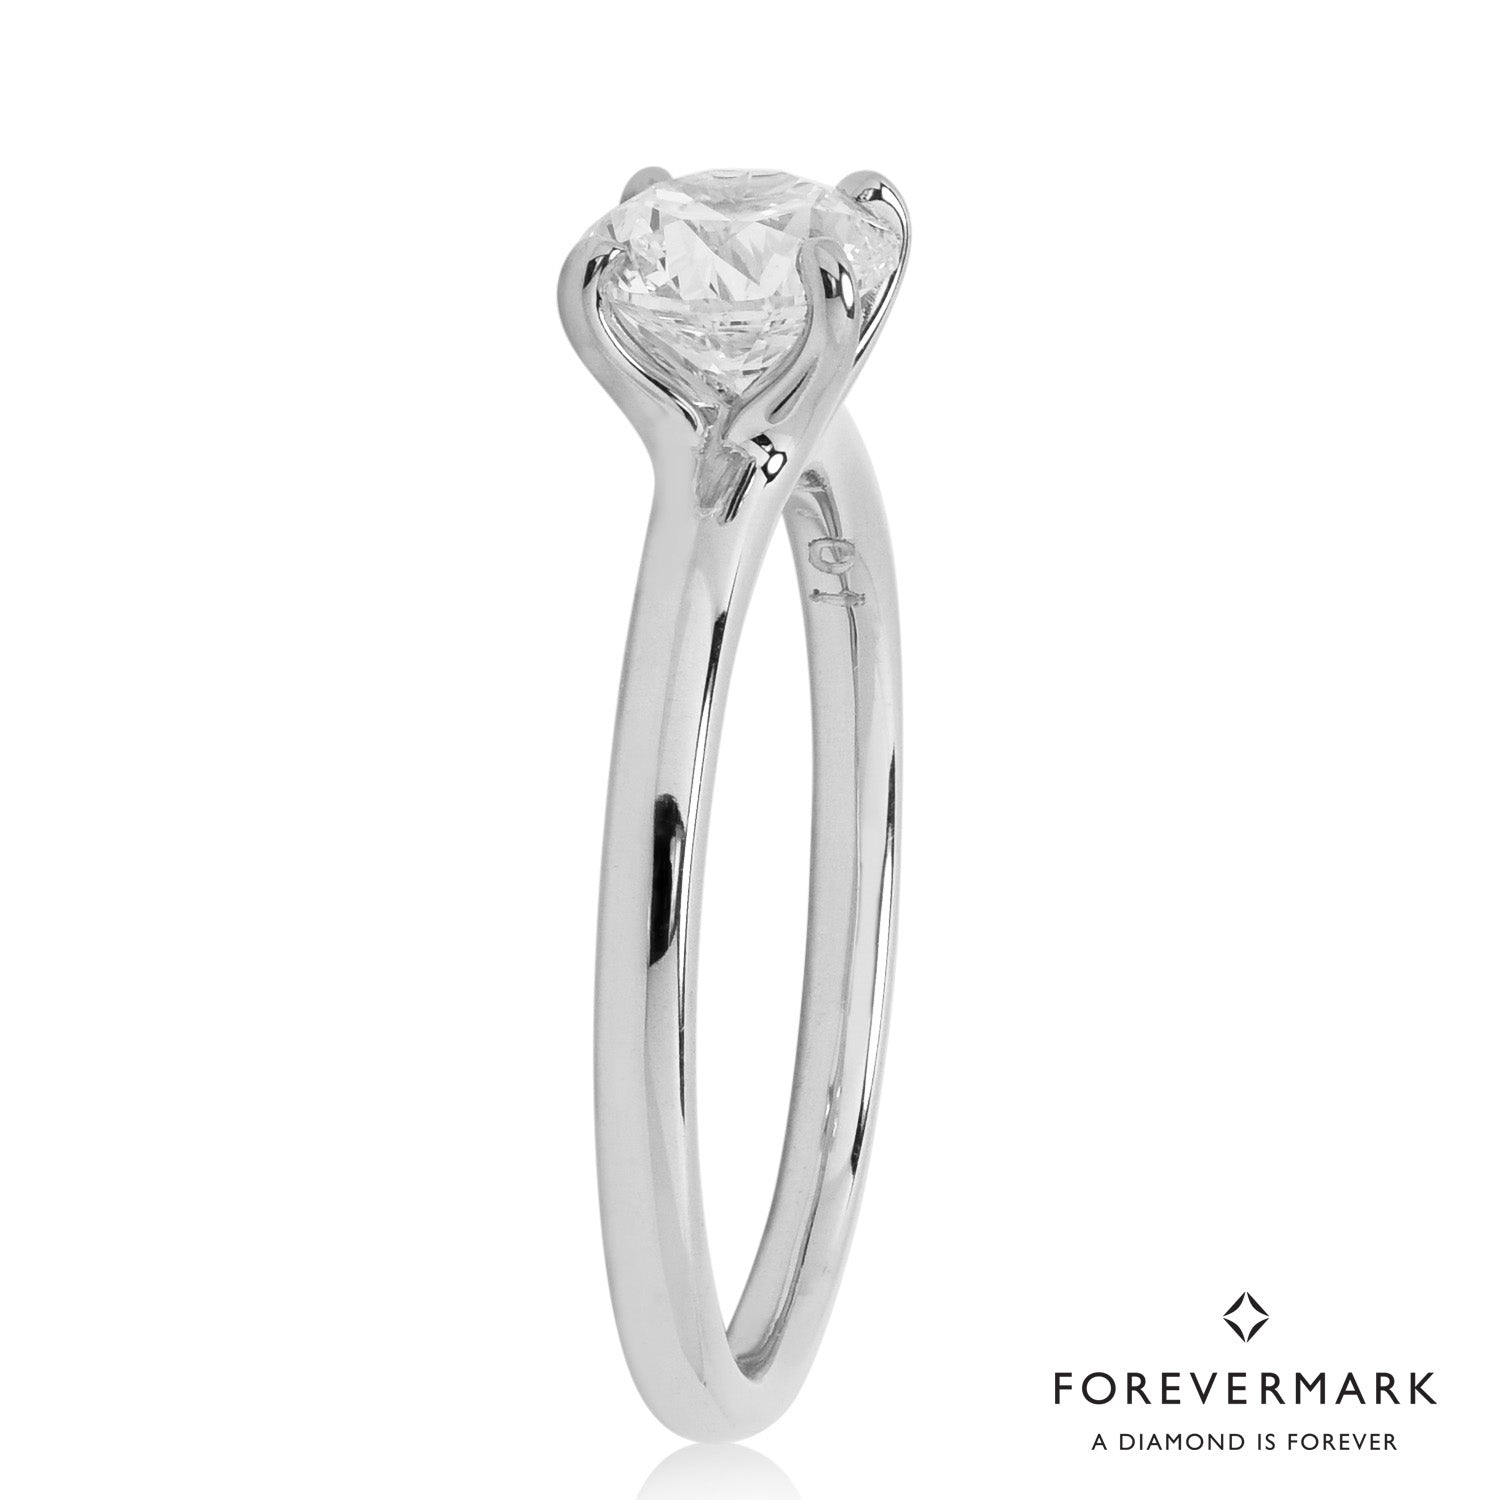 De Beers Forevermark Diamond Solitaire Ring in 14kt White Gold (1ct)